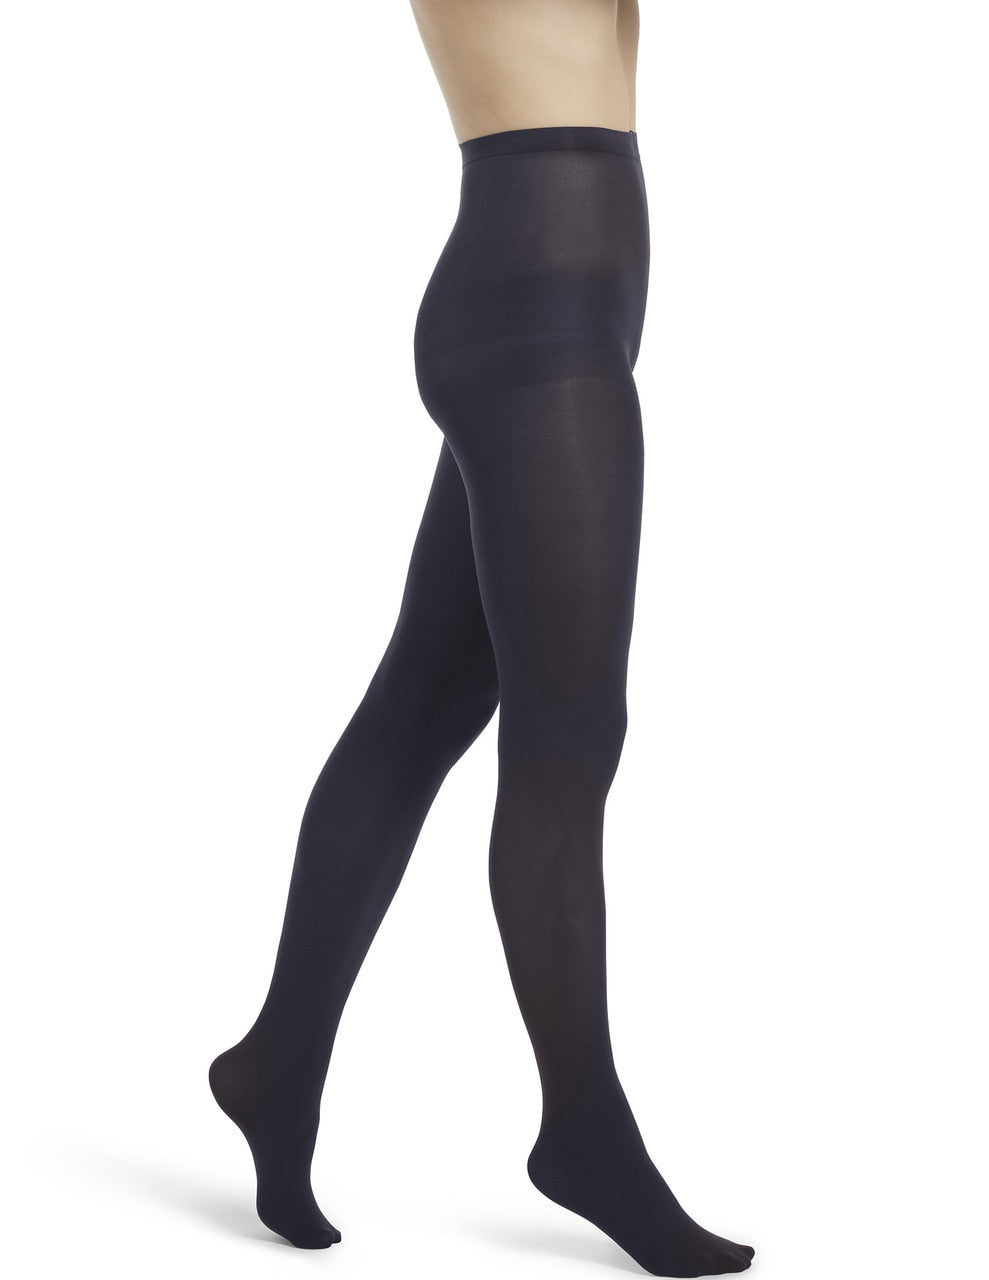 Super Opaque Tights with Control Top